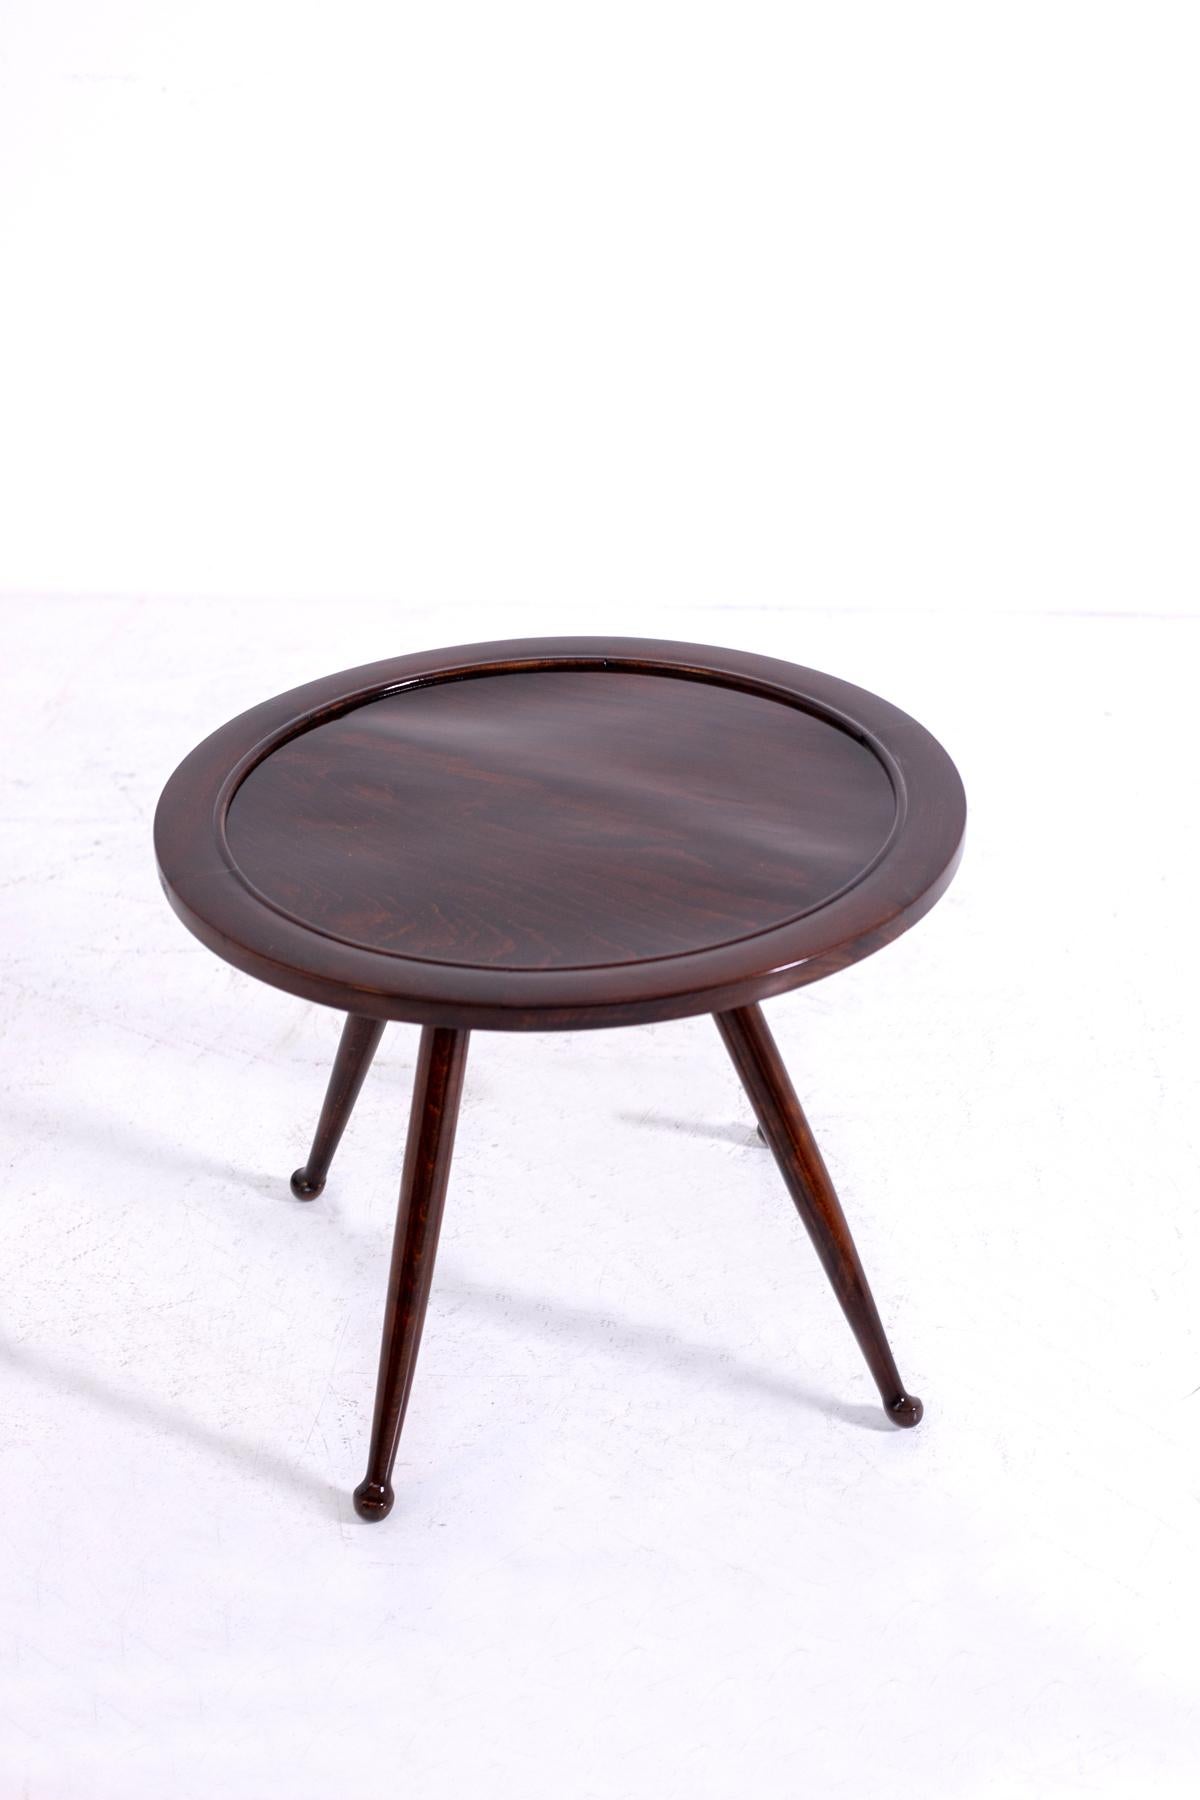 Elegant side table by Osvaldo Borsani from the 1950s. The coffee table is made in great quality as evidenced by its wood grain and construction.
The table has been restored. The coffee table has a circular table top and its four elongated legs